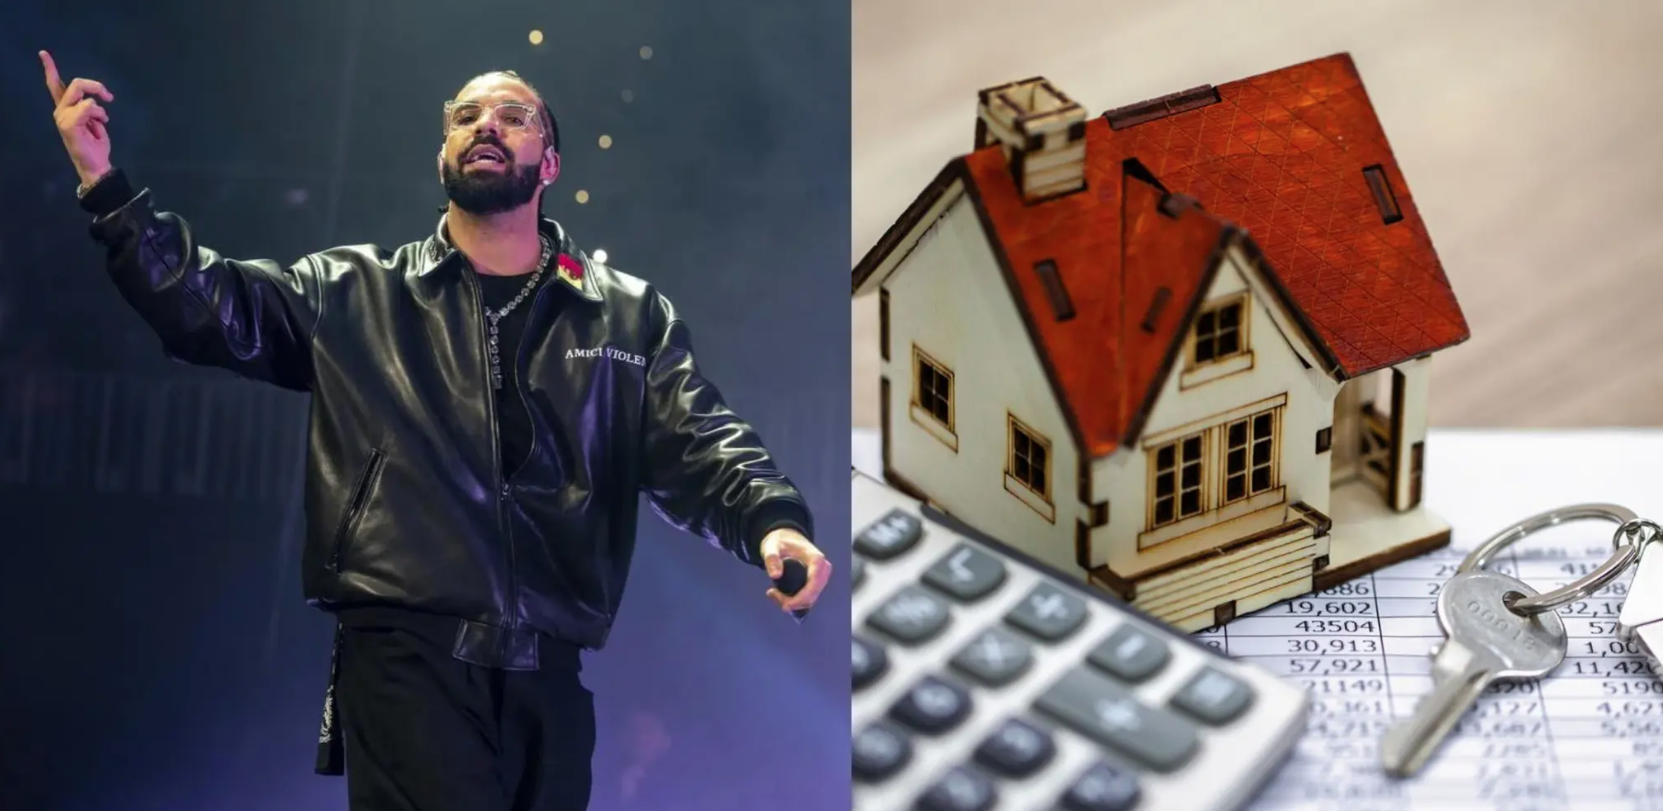 Drake Offers to Give Fan $100,000 to Pay Off Late Mother’s House